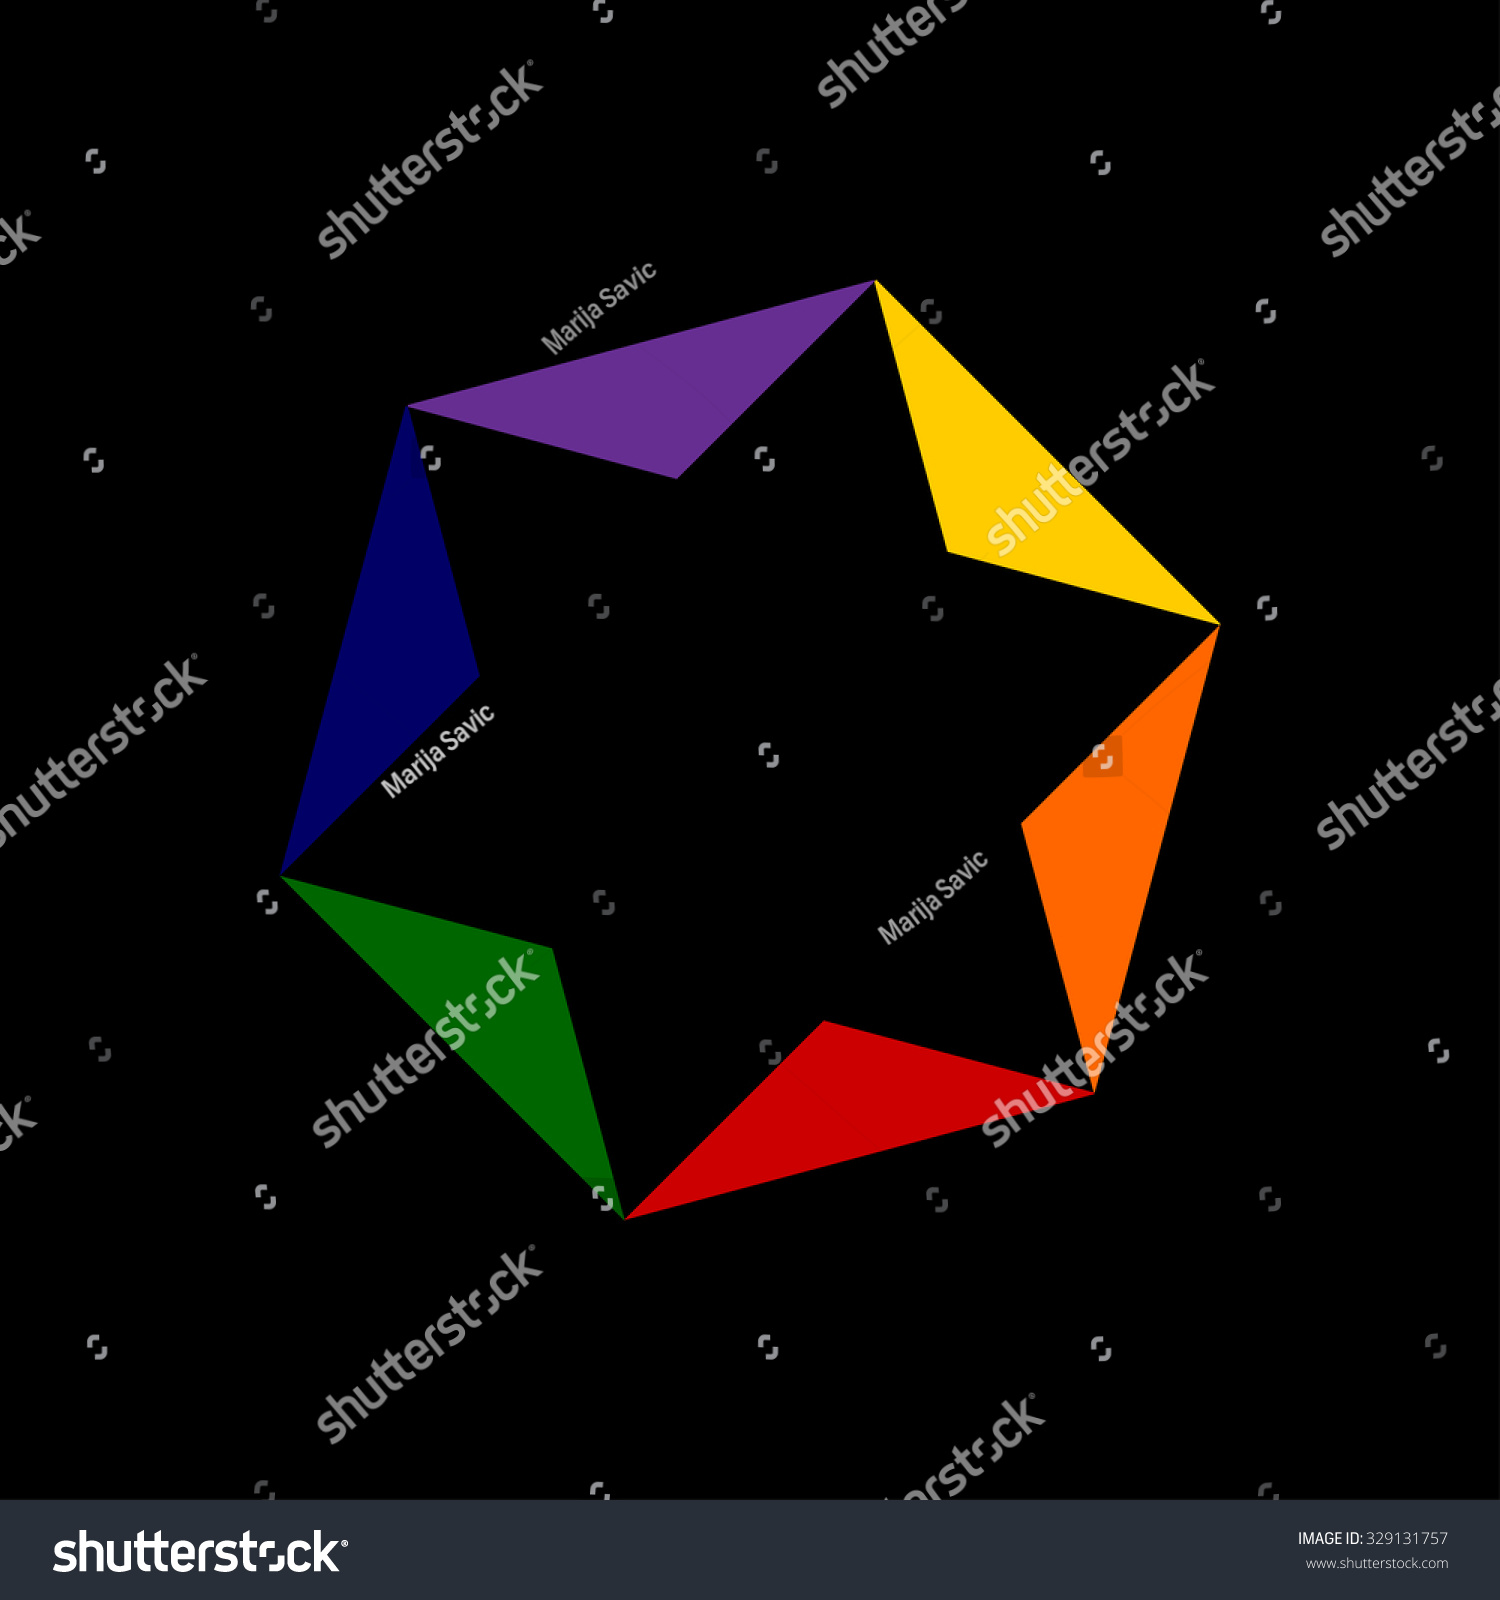 Colorful Logo Design Black Background Stock Stock Vector (Royalty Free ...